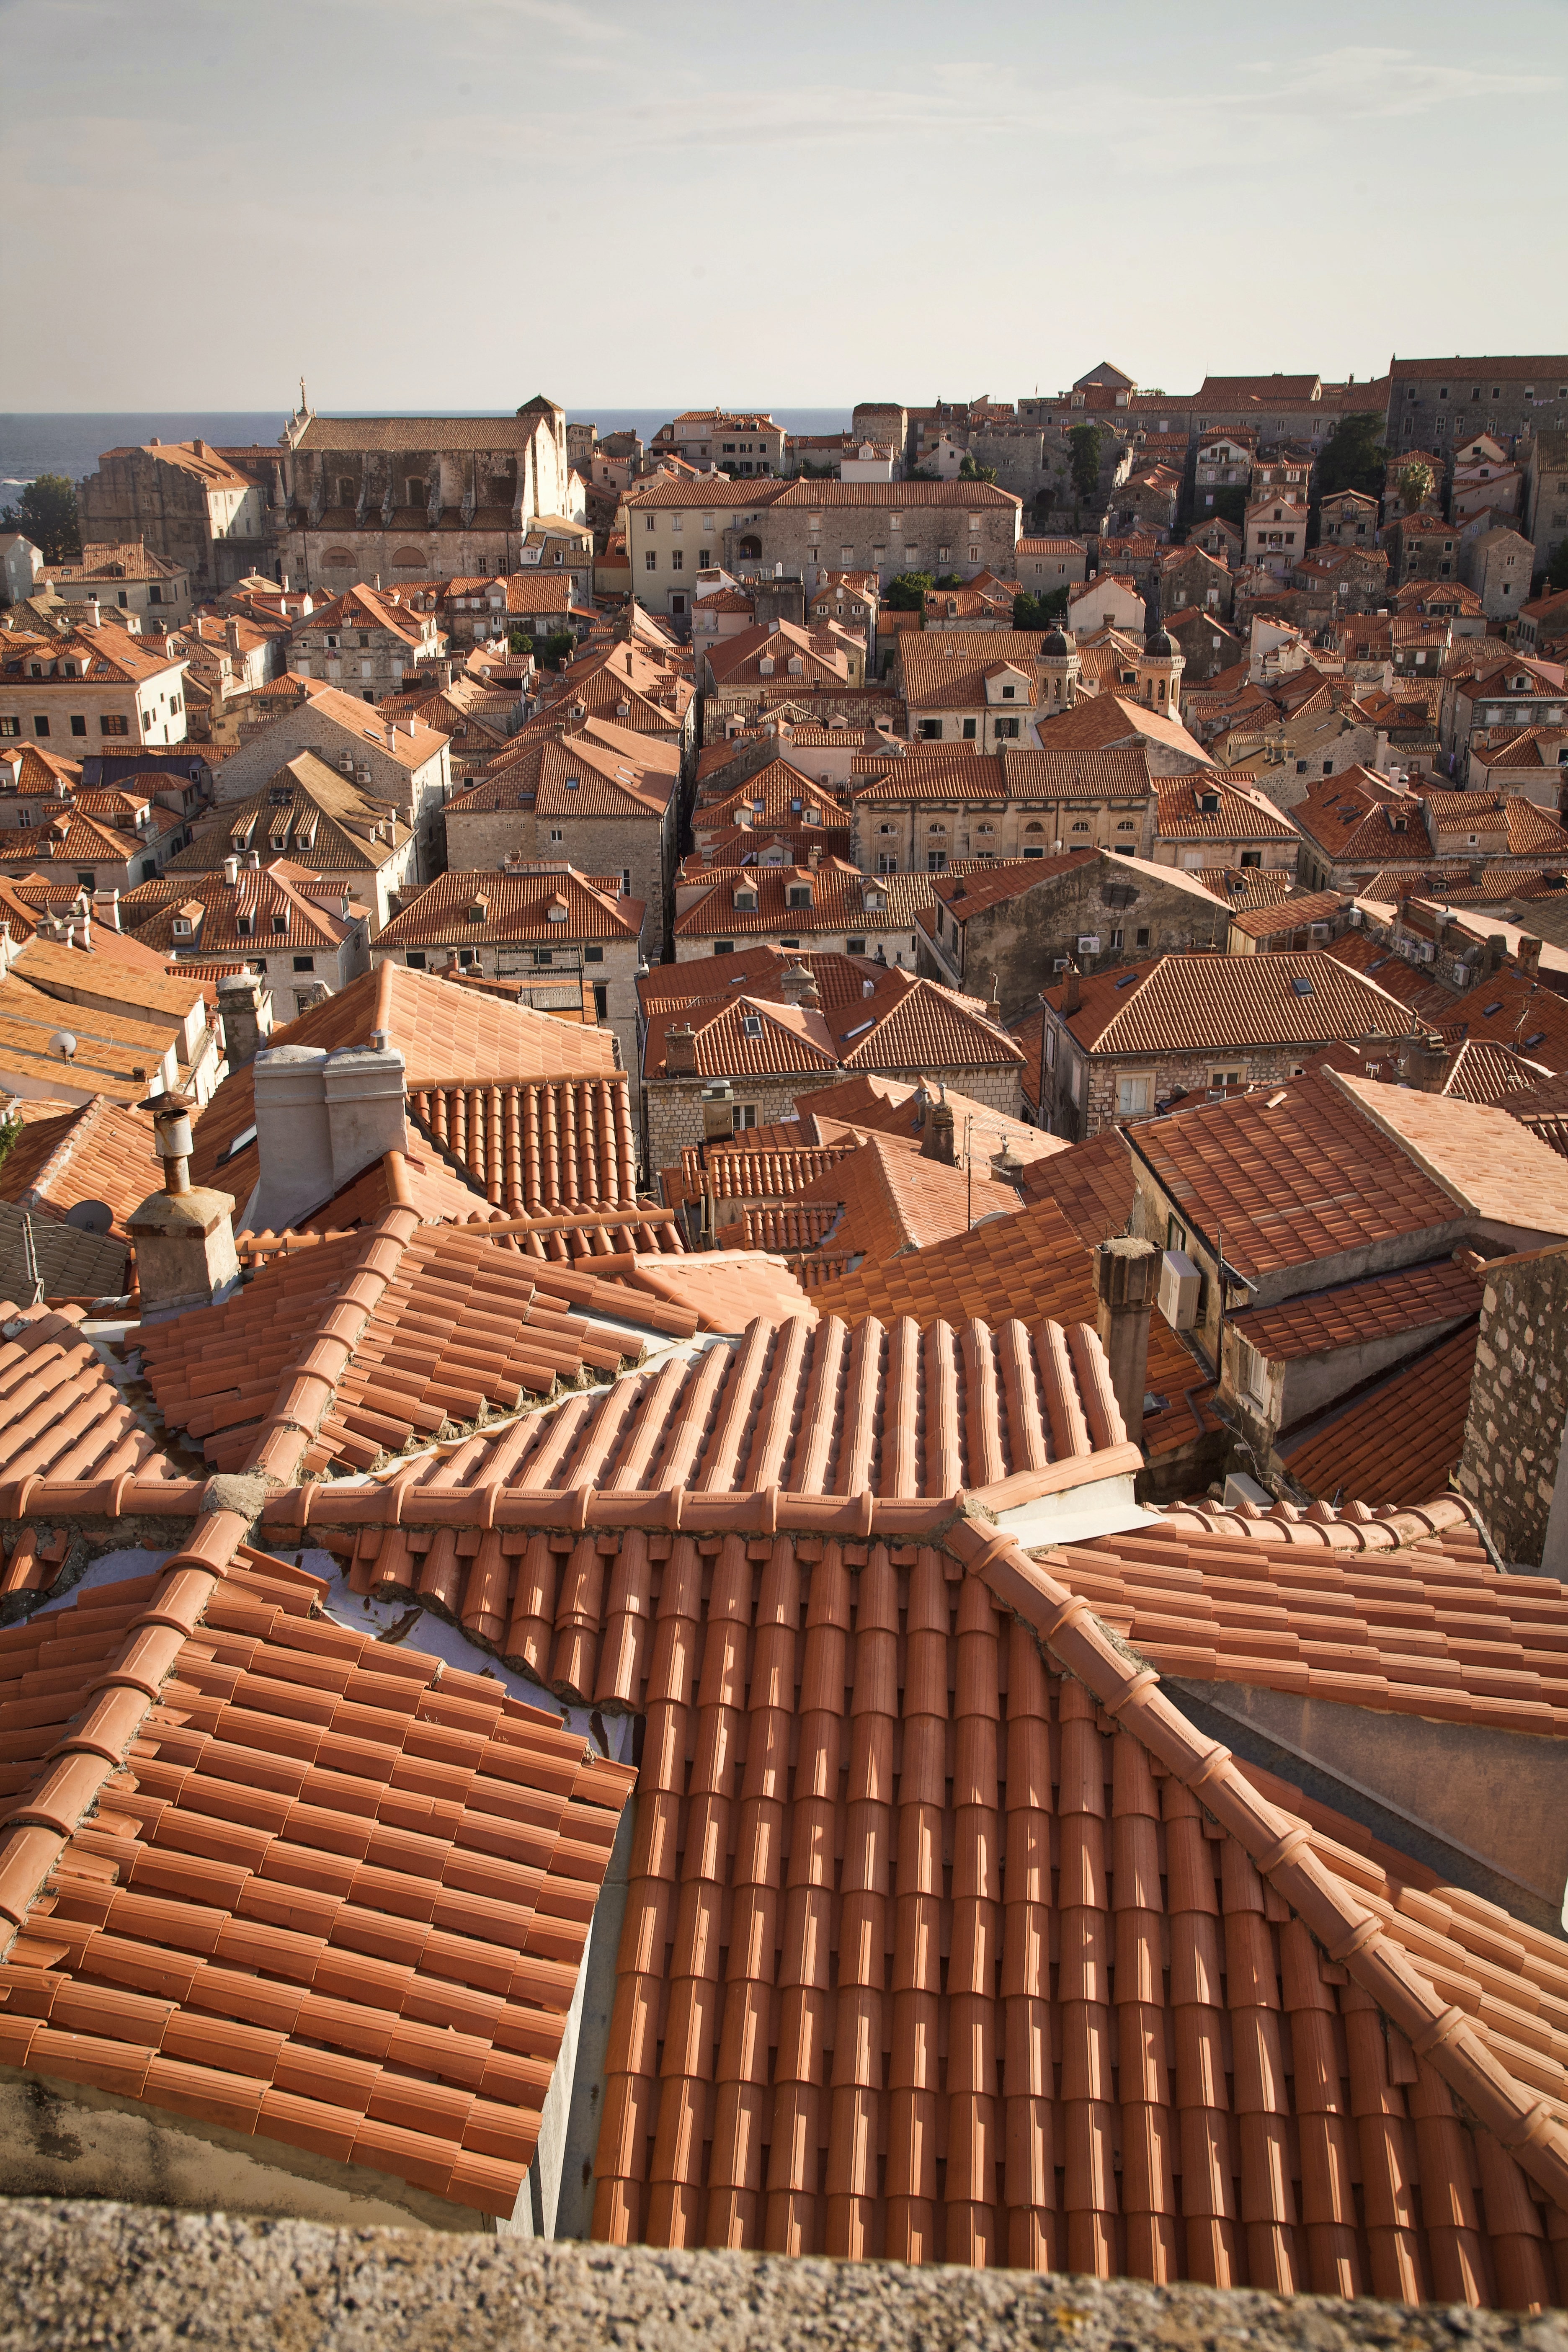 cities, city, building, view from above, roof, roofs 2160p